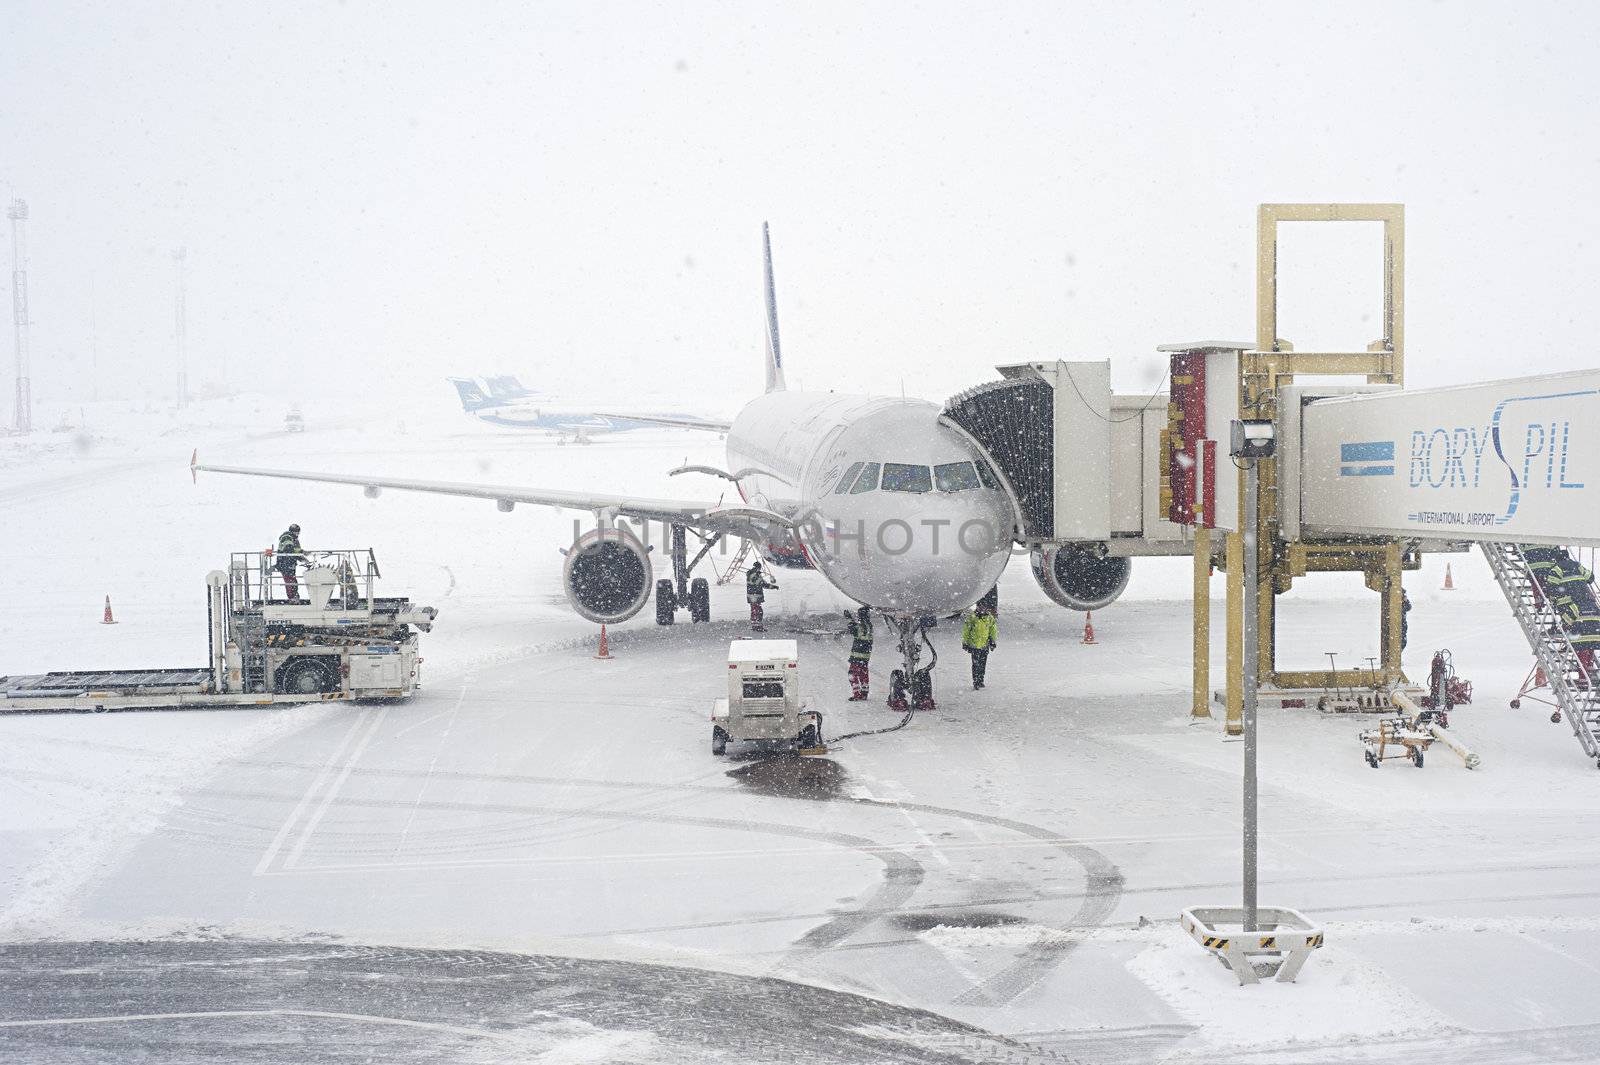 Kiev, Ukraine - January 12, 2013: Unidentified workers prepairing an airplane duirng the snowfall. Kiev was covered by around 20 inches of snow, the largest amount to fall in one weekend since records in 1889